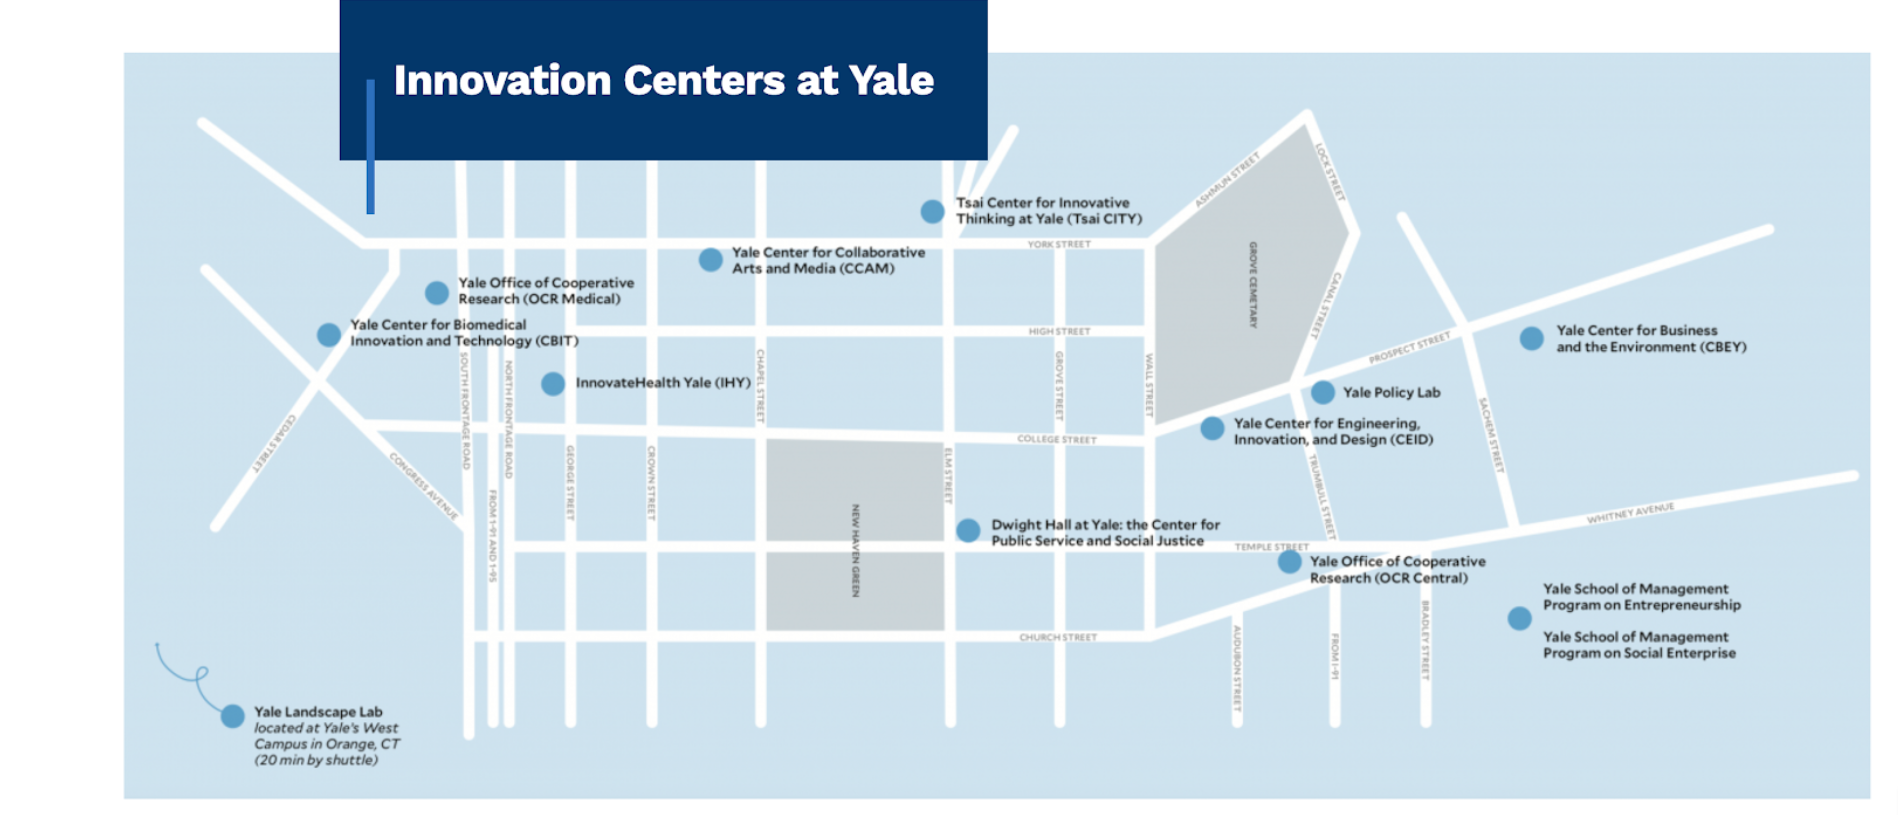 Innovation Centers at Yale